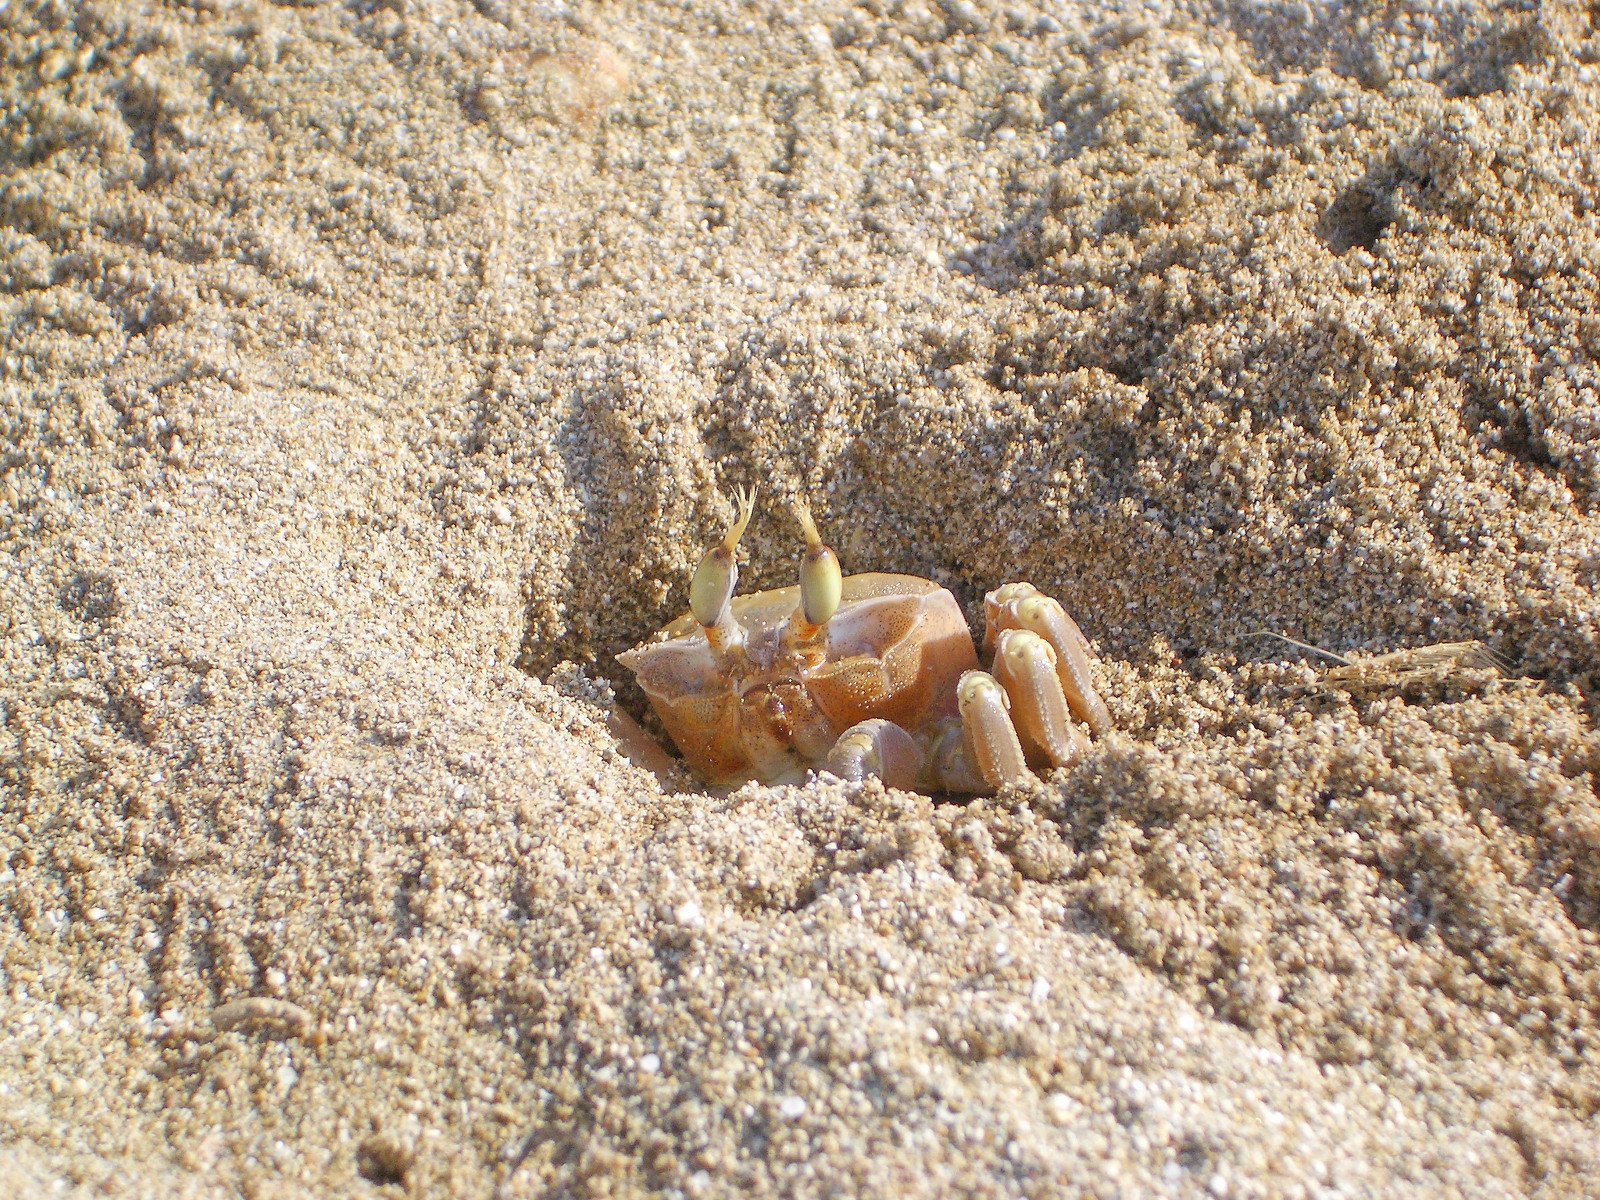 a sand crab on its hind legs crawling